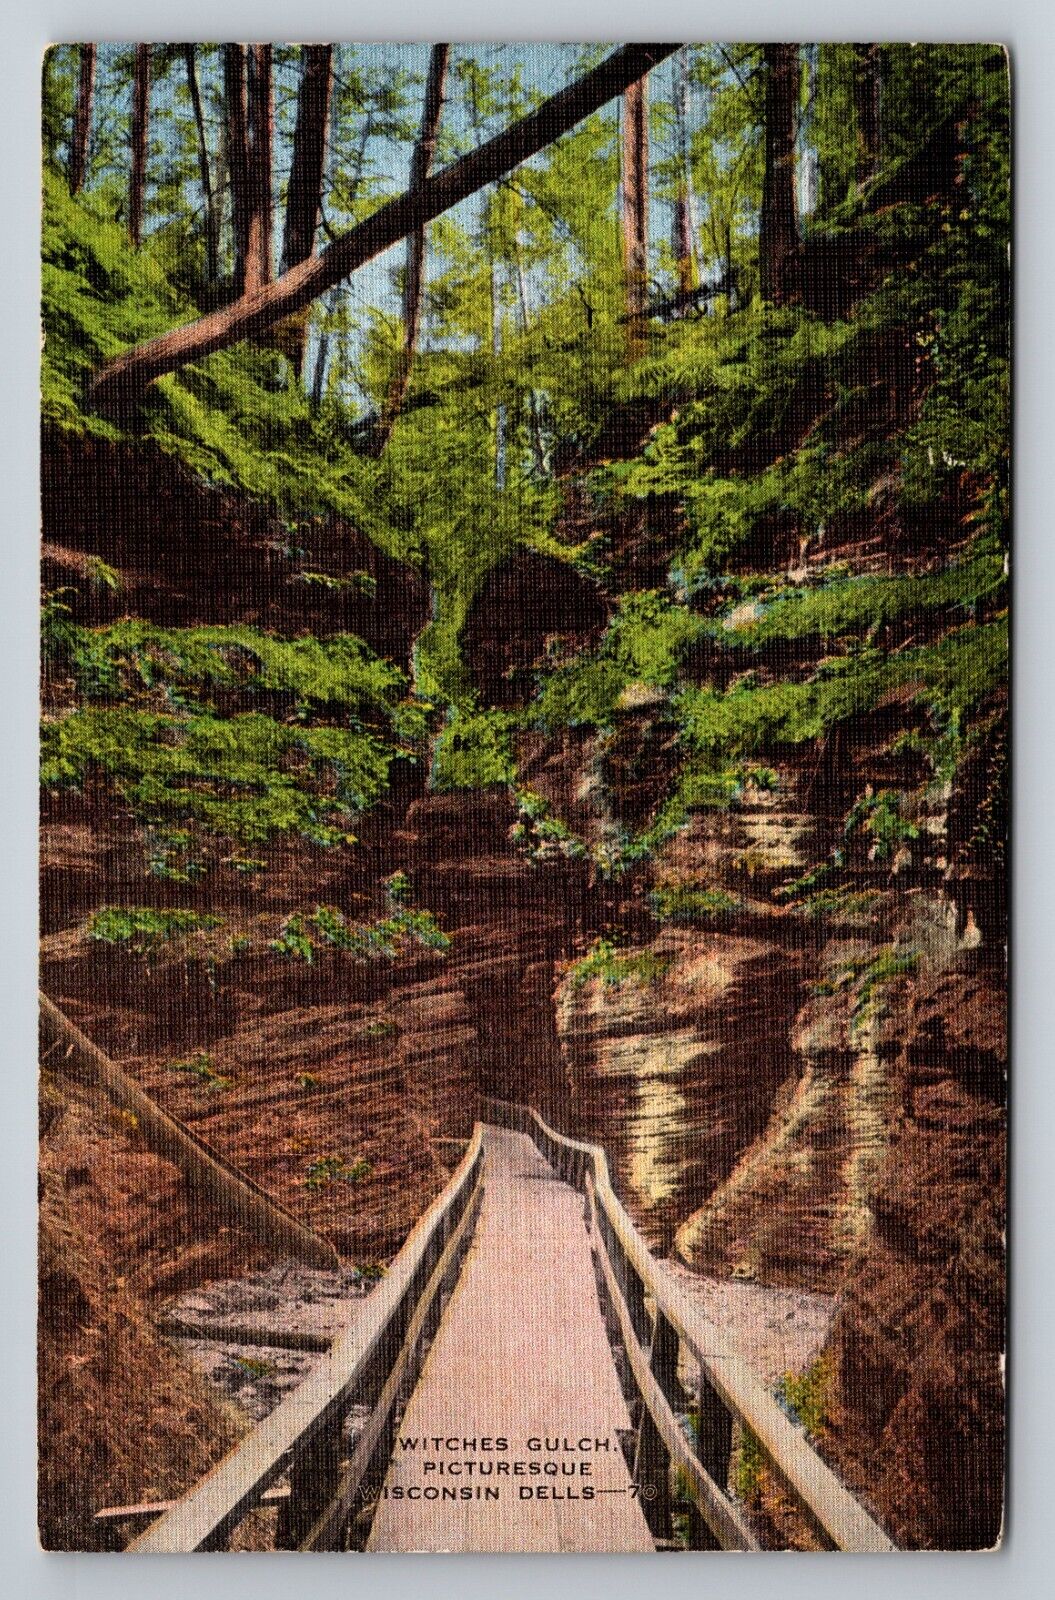 Witches Gulch Picturesque Wisconsin Dells Vintage Unposted Linen